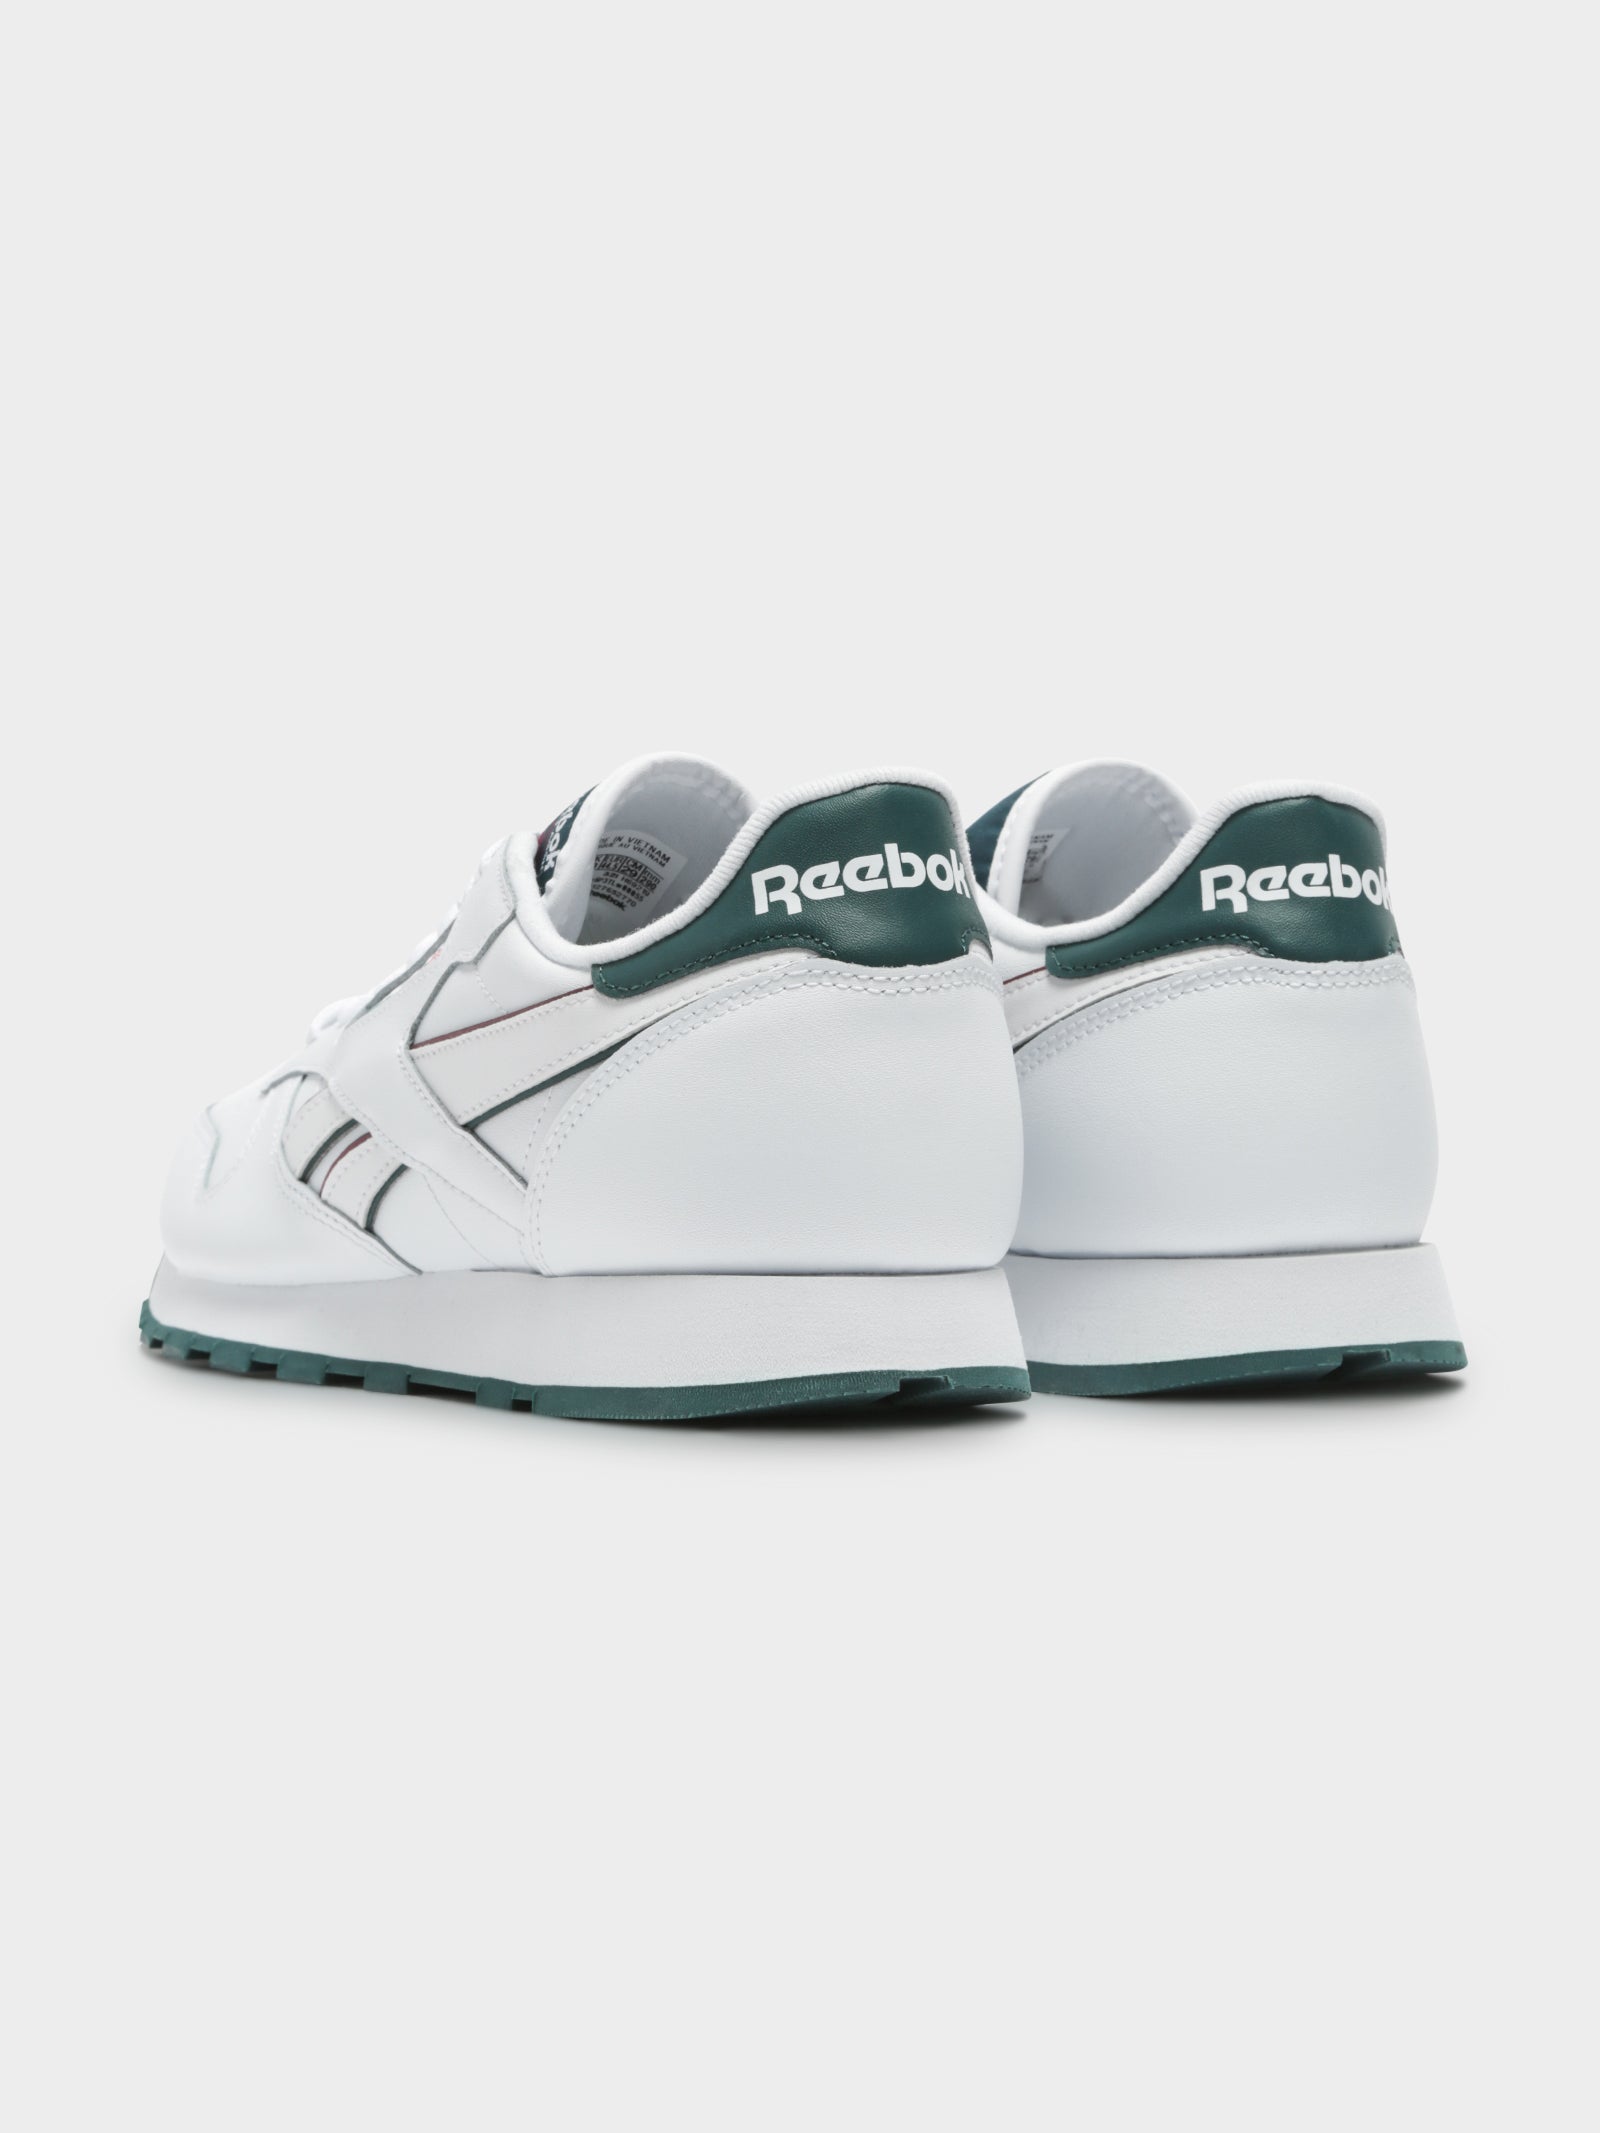 Unisex Classic Leather Sneaker in Green & White